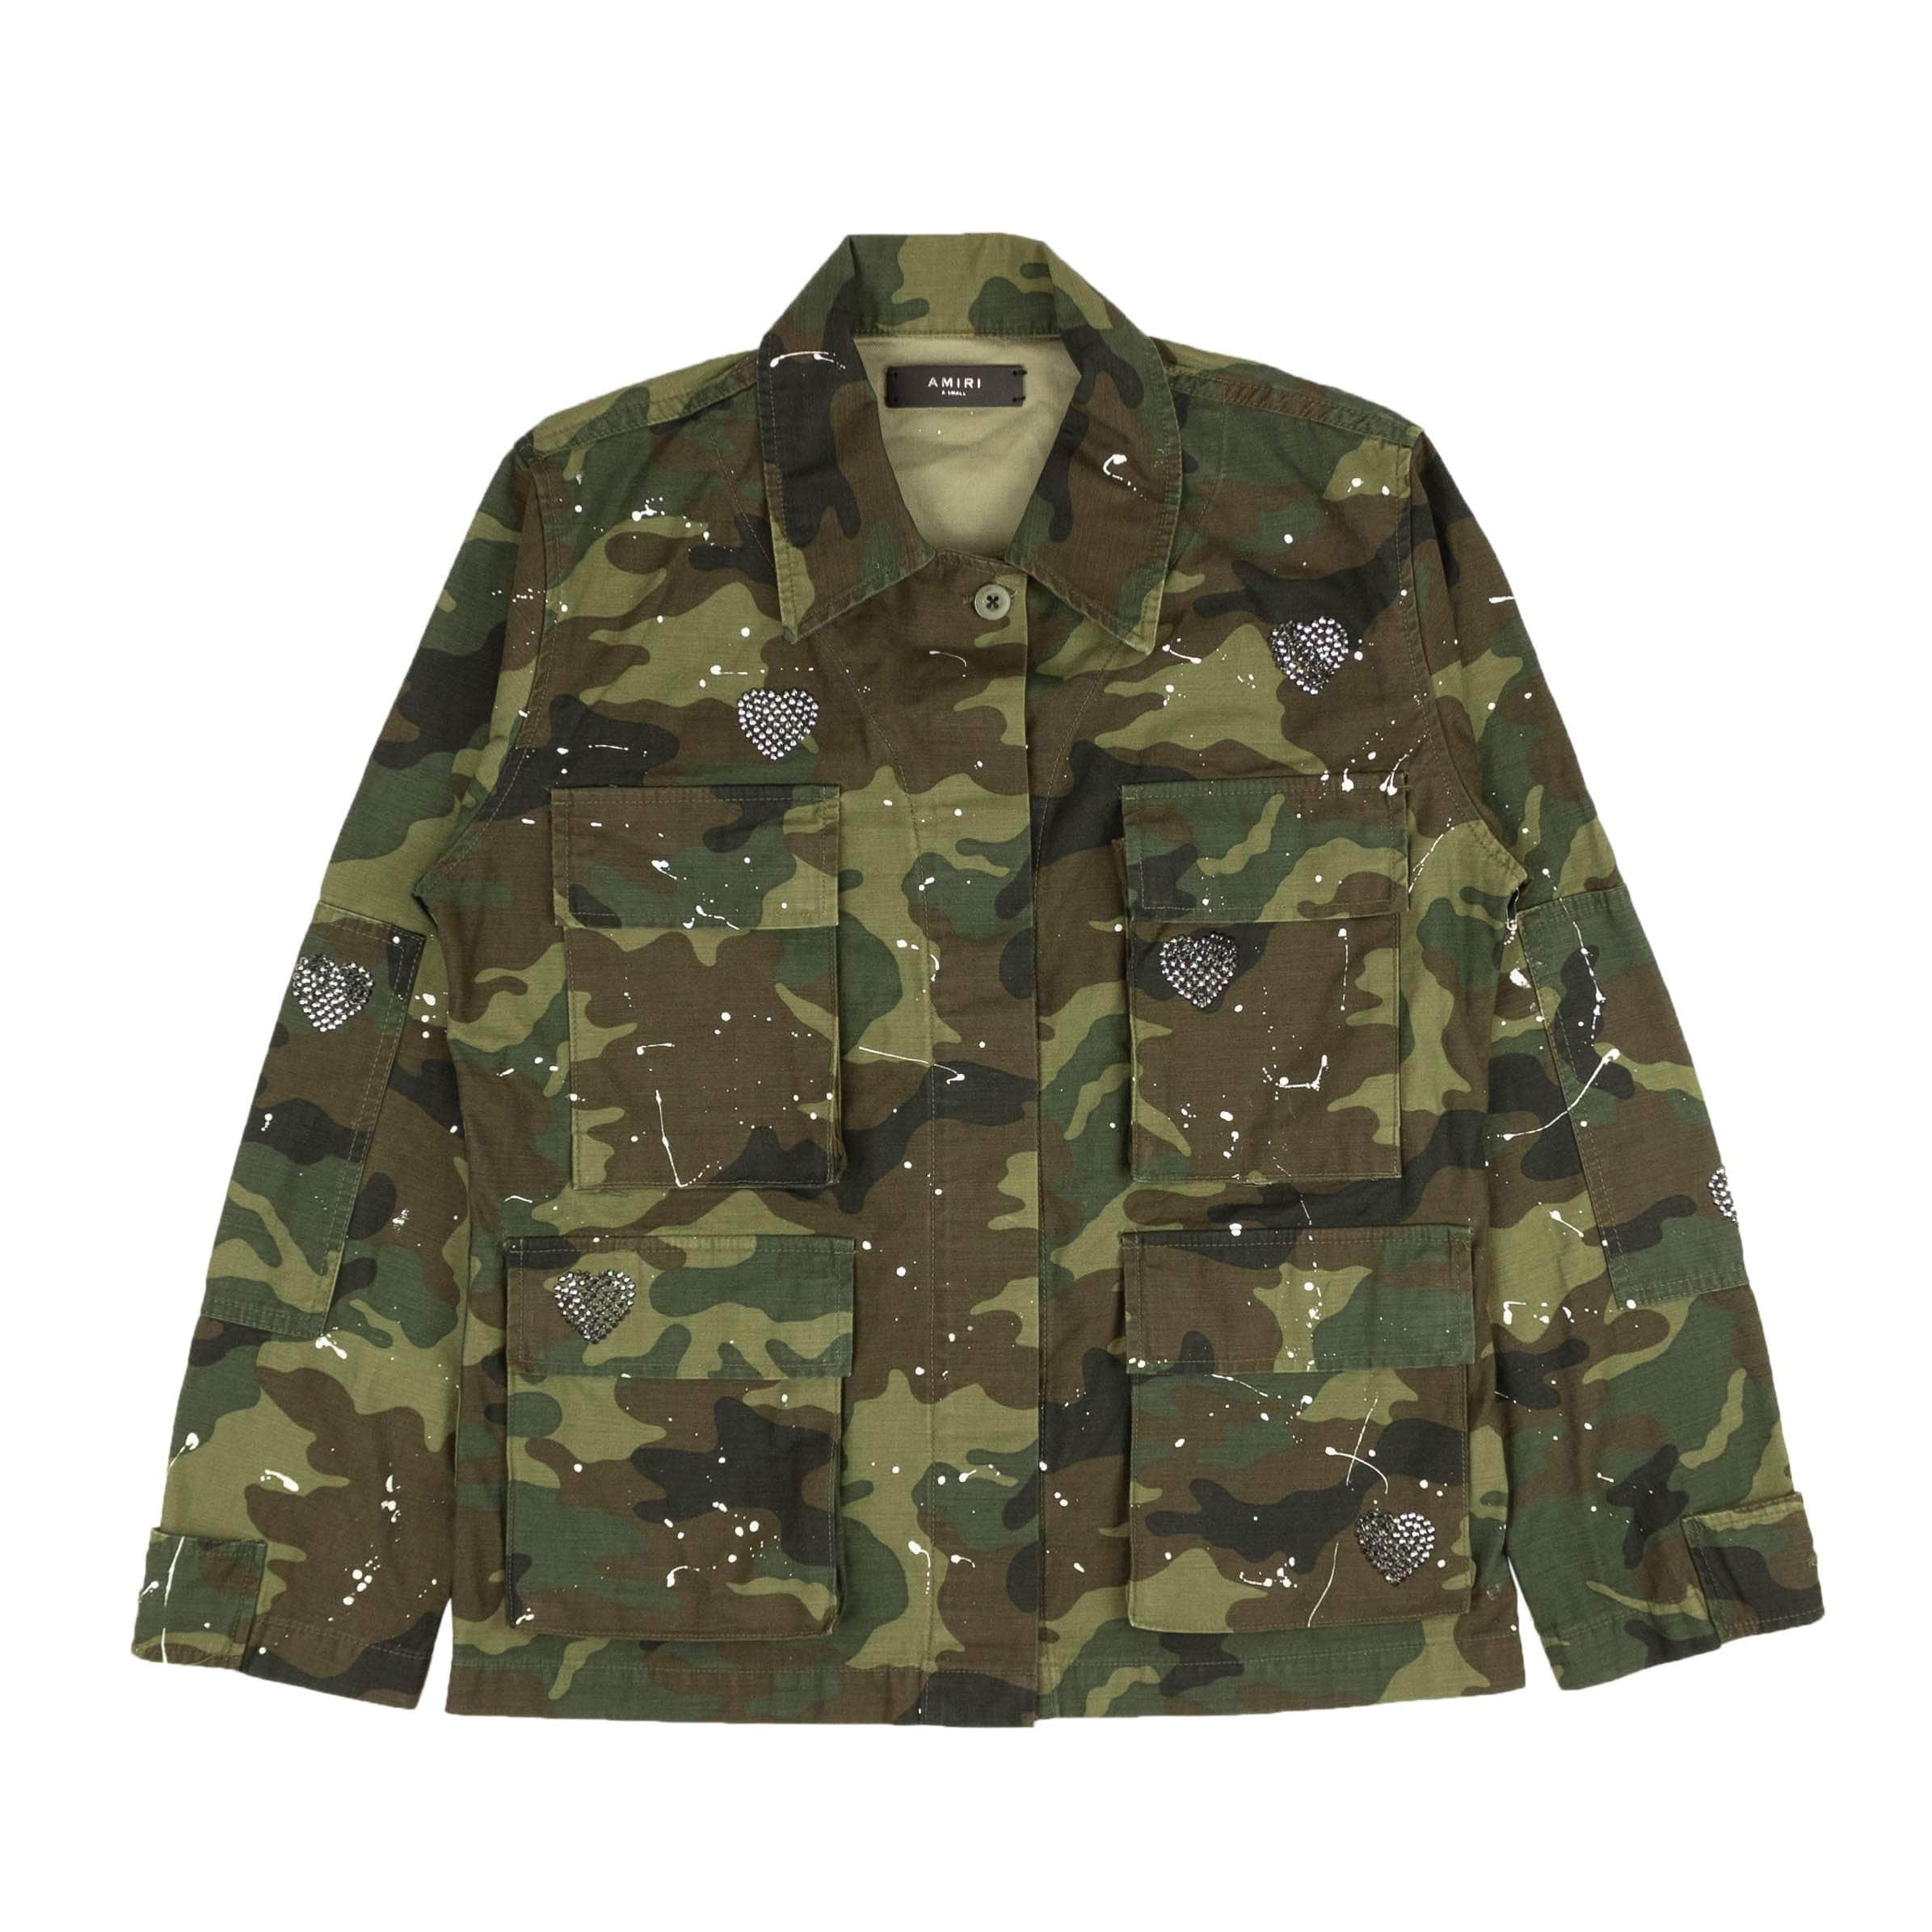 Amiri 250-500, amiri, channelenable-all, chicmi, couponcollection, gender-womens, main-clothing, size-xs, womens-jackets-blazers XS Green Camo Crystal Field Jacket 73A-1489/XS 73A-1489/XS